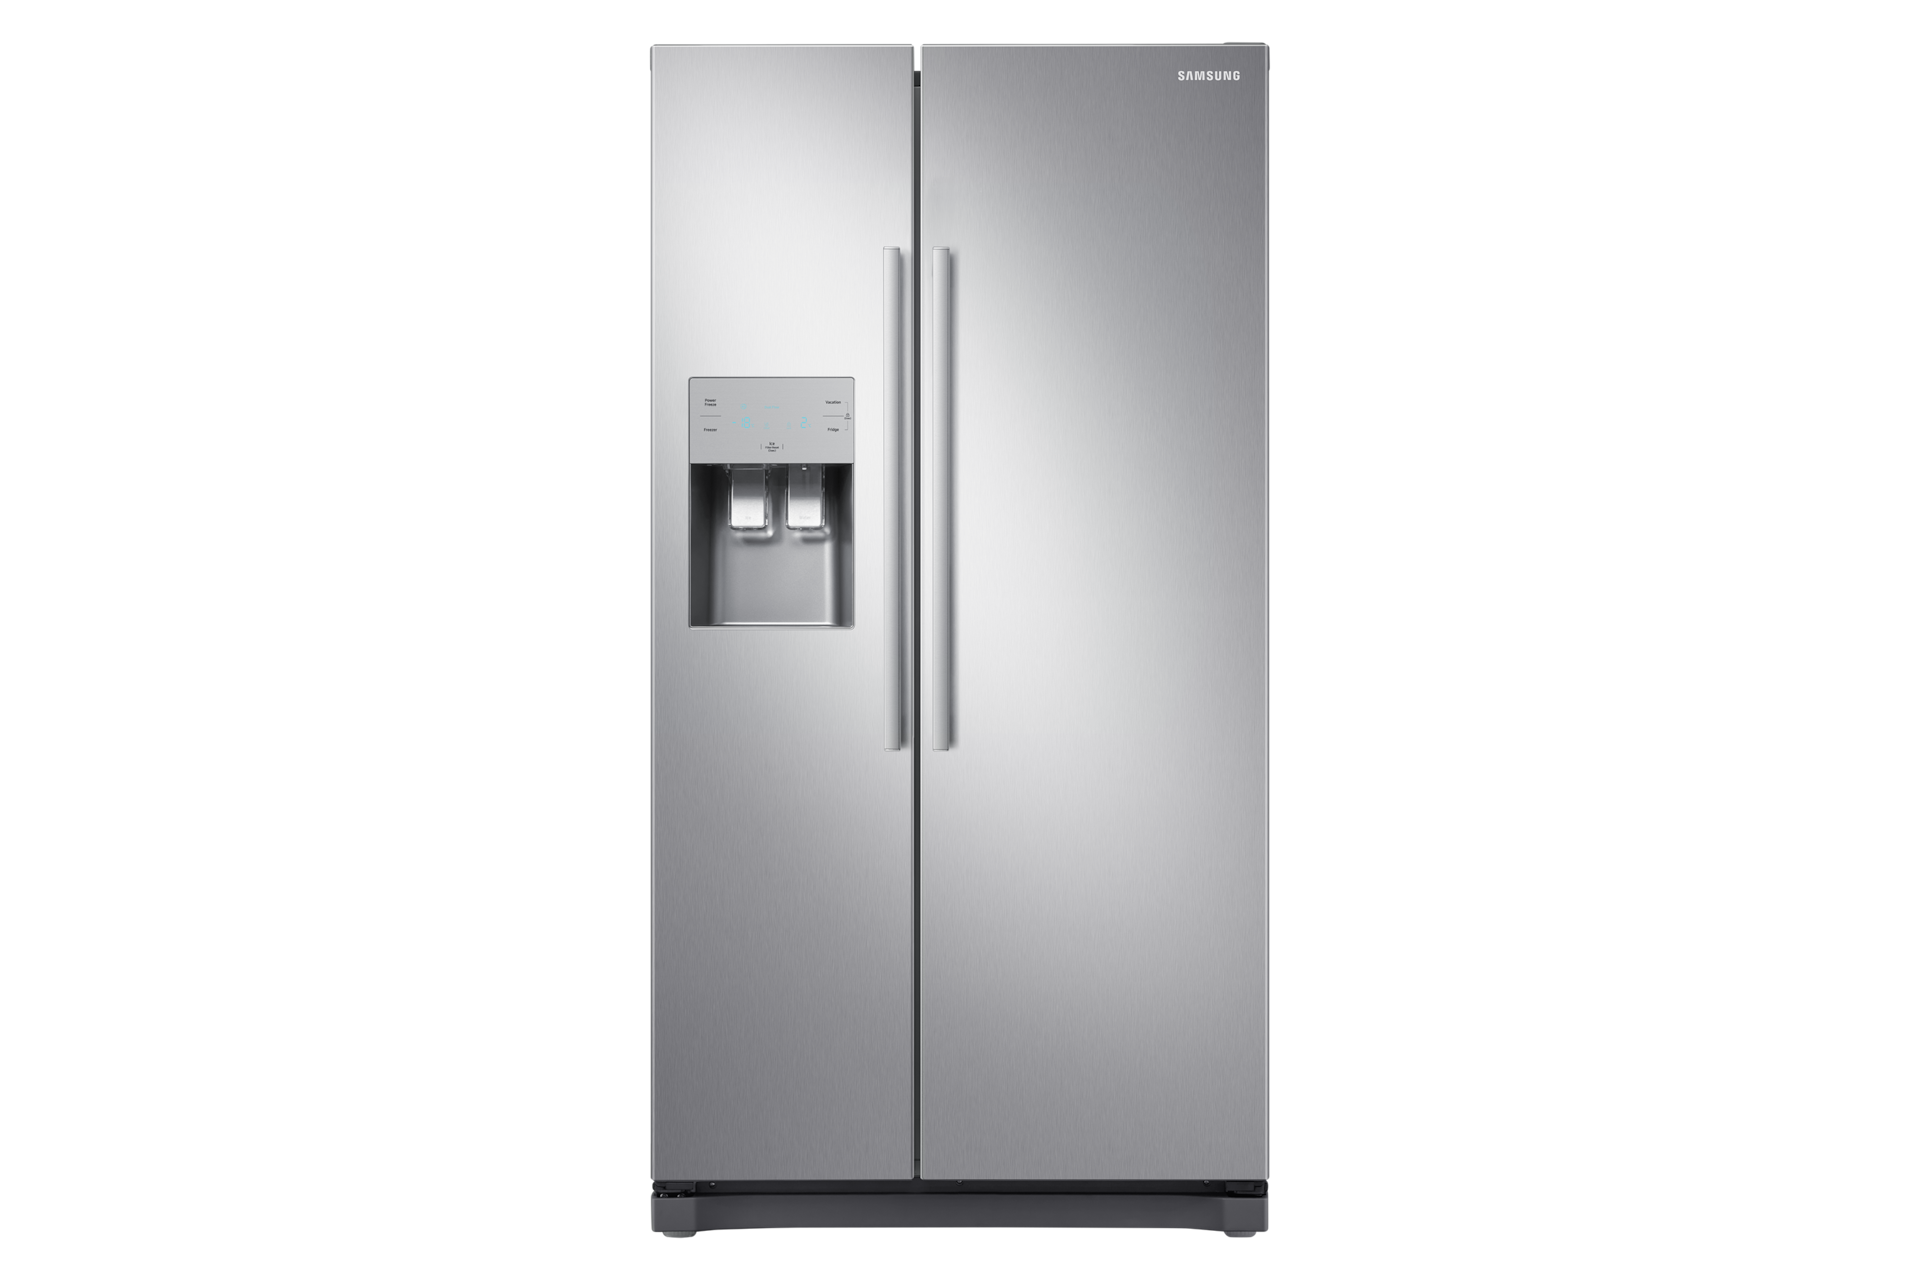 Buy SAMSUNG Series 7 SpaceMax RS67A8811S9/EU American-Style Fridge